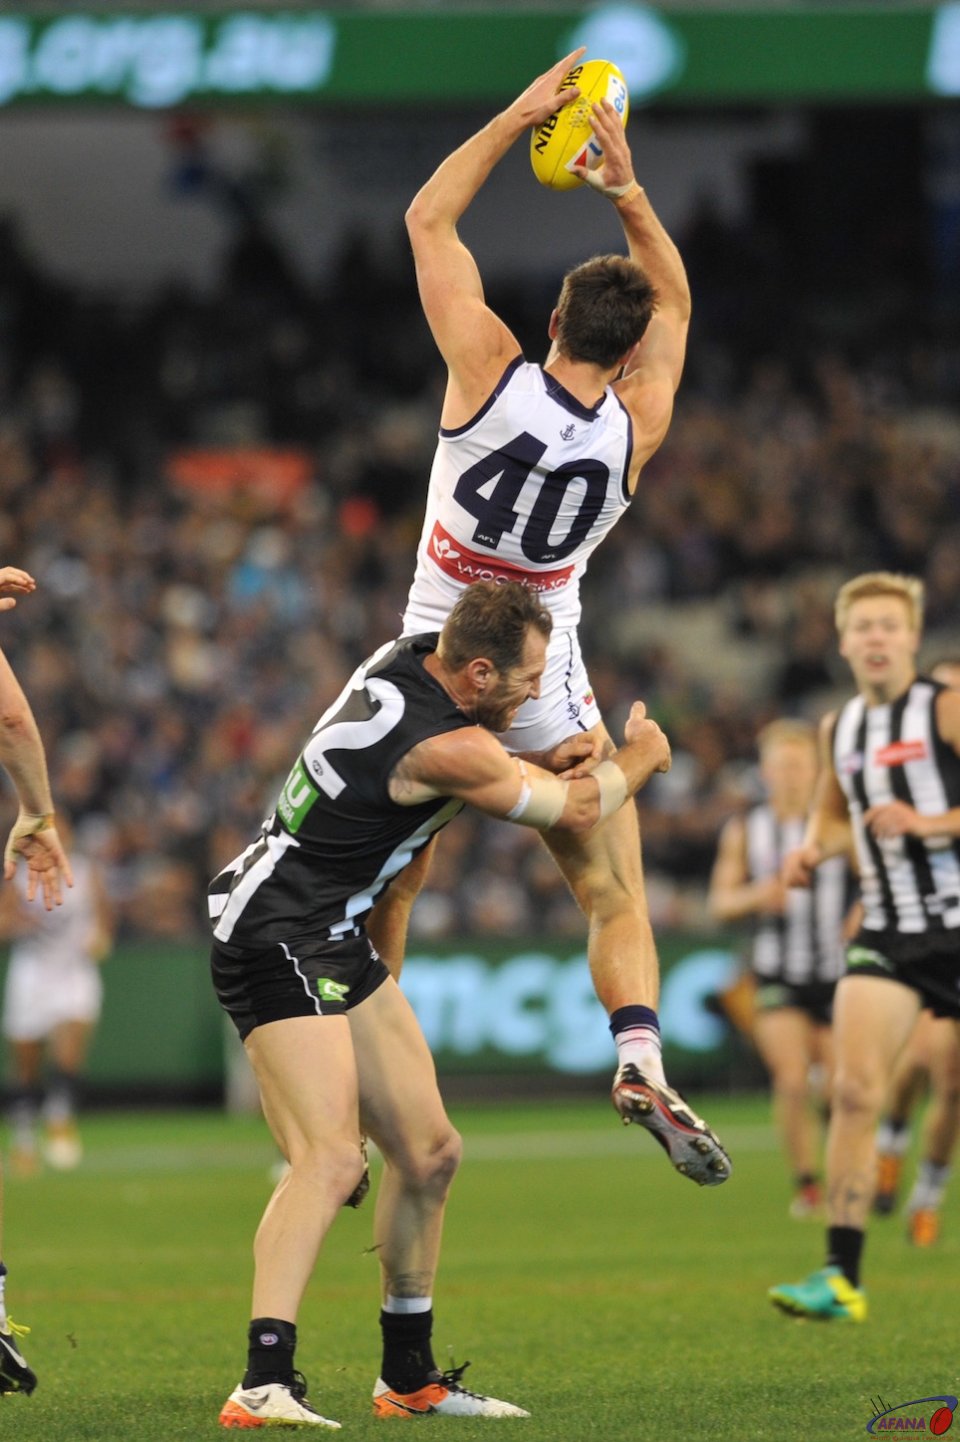 Cloke outjumped by Collins